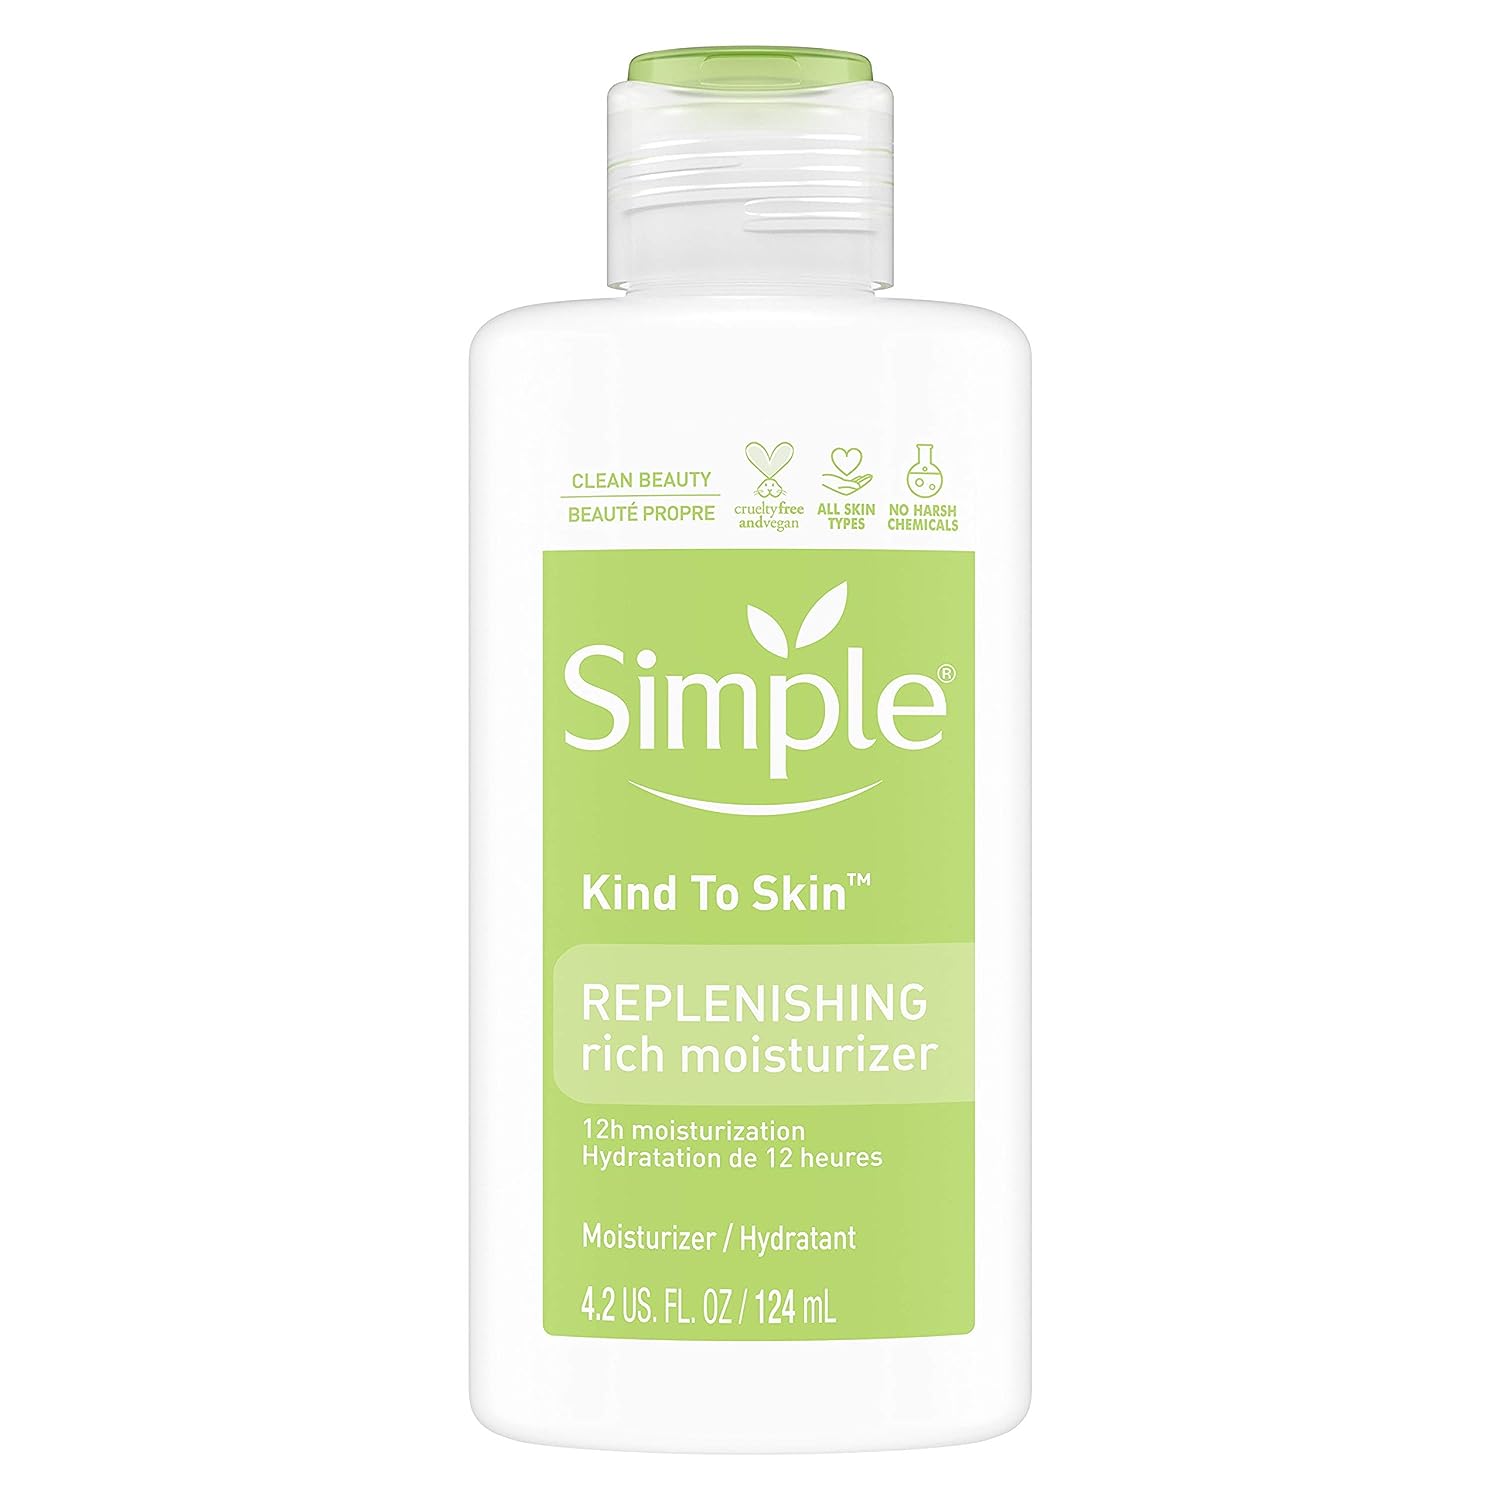 Simple Kind to Skin Face Moisturizer For Sensitive Skin Replenishing Rich 12-Hour Moisturization for All Skin Types 4.2